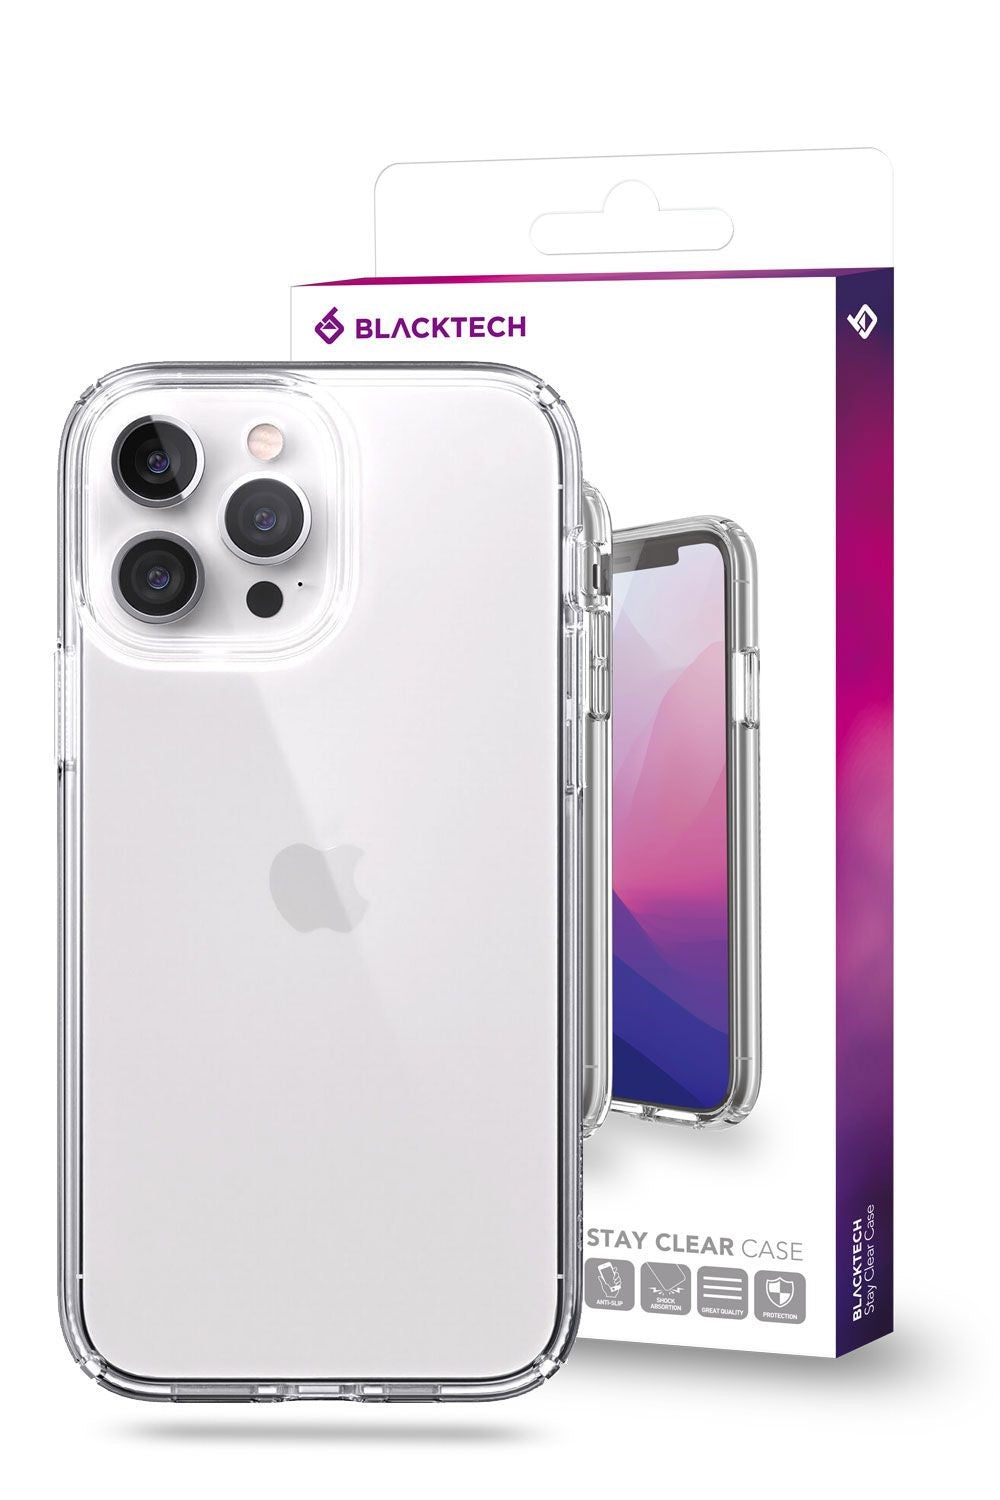 Blacktech iPhone 12 Mini Stay Thick Rugged Clear Protective Case